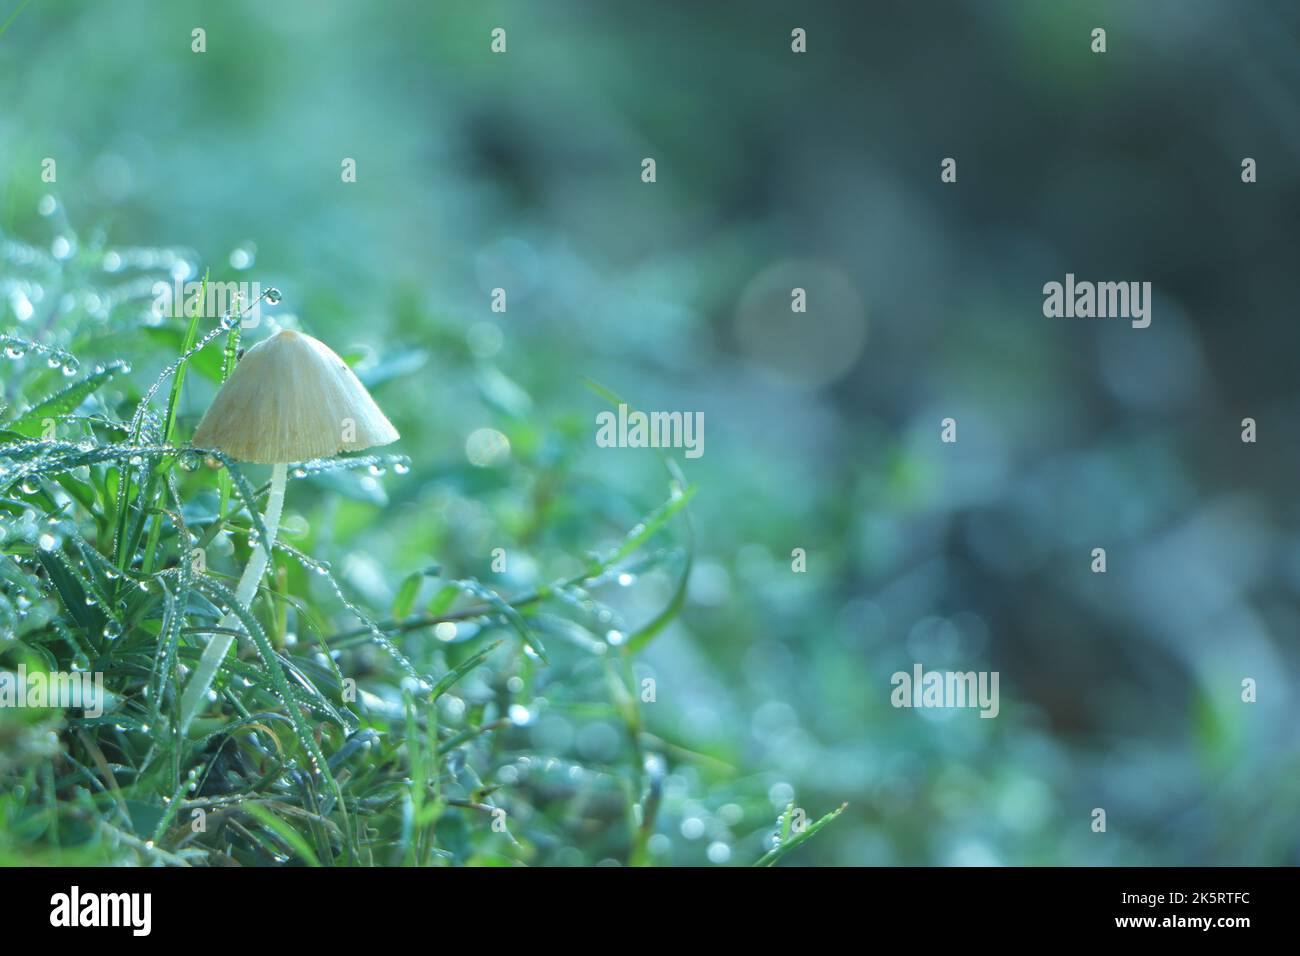 Mushroom on grass, Autumnal seasonal natural background. rainy weather. Mushroom picking, fall time concept. copy space Stock Photo